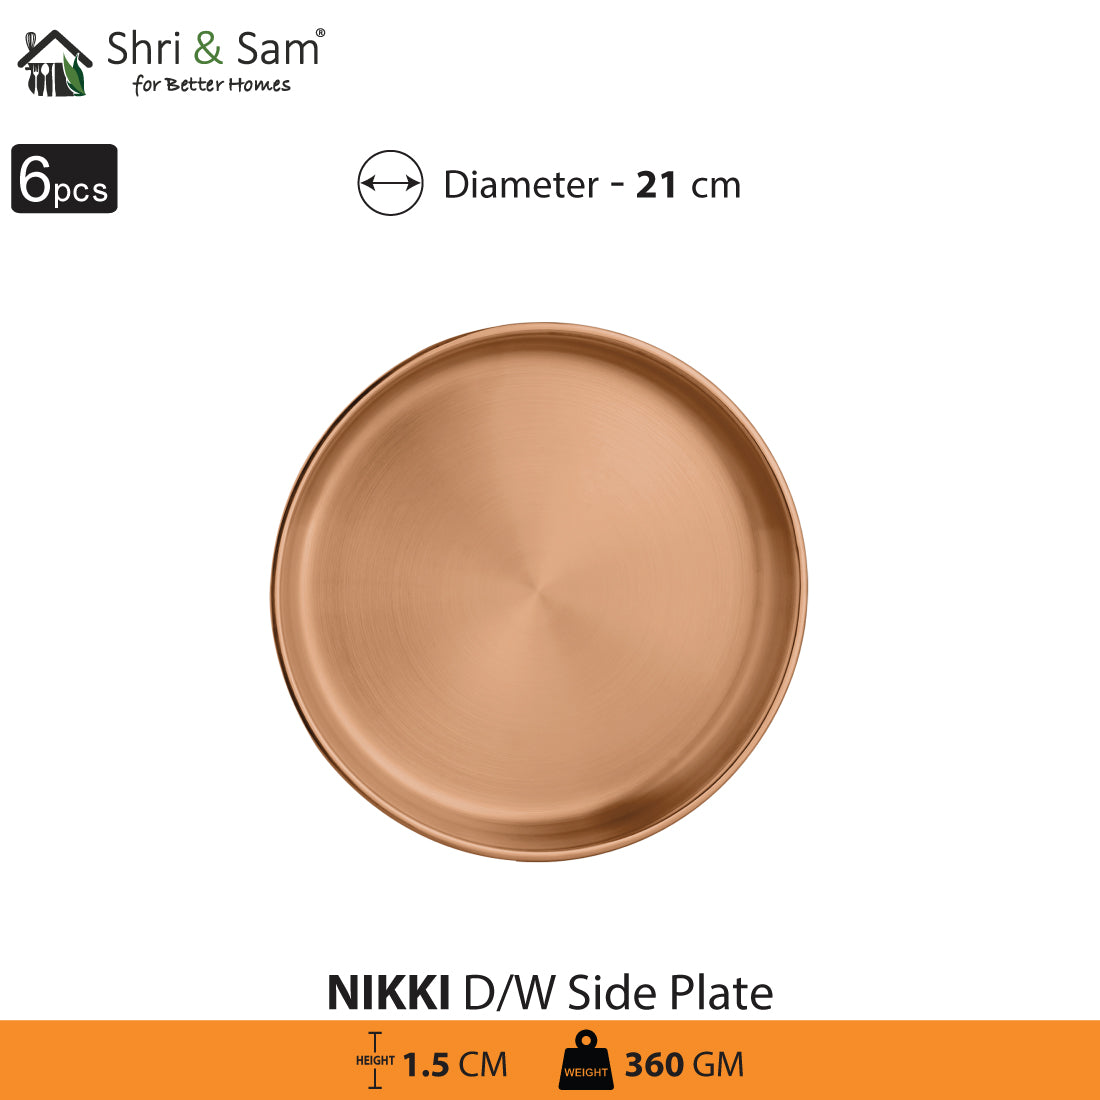 Stainless Steel 6 PCS Double Wall Side Plate with Rose GoldPVD Coating Nikki